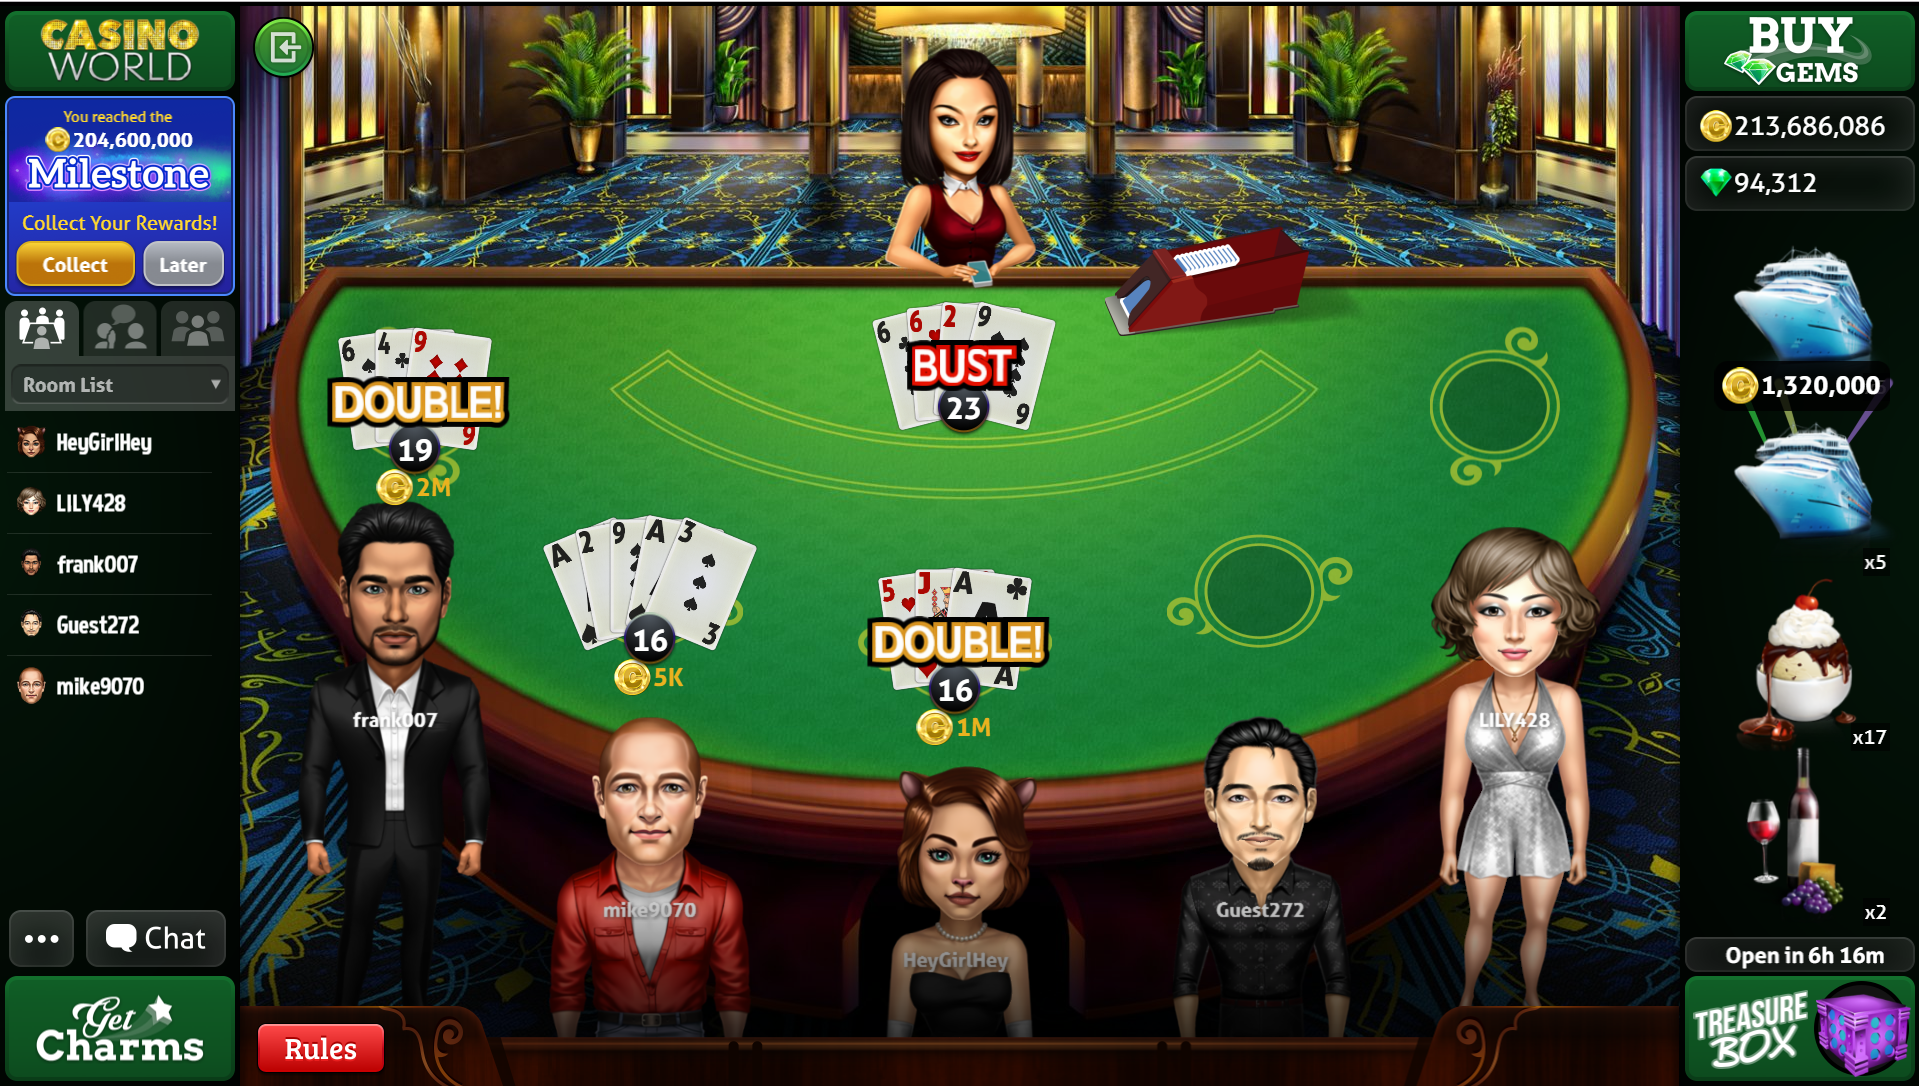 What Are The 5 Main Benefits Of online casino